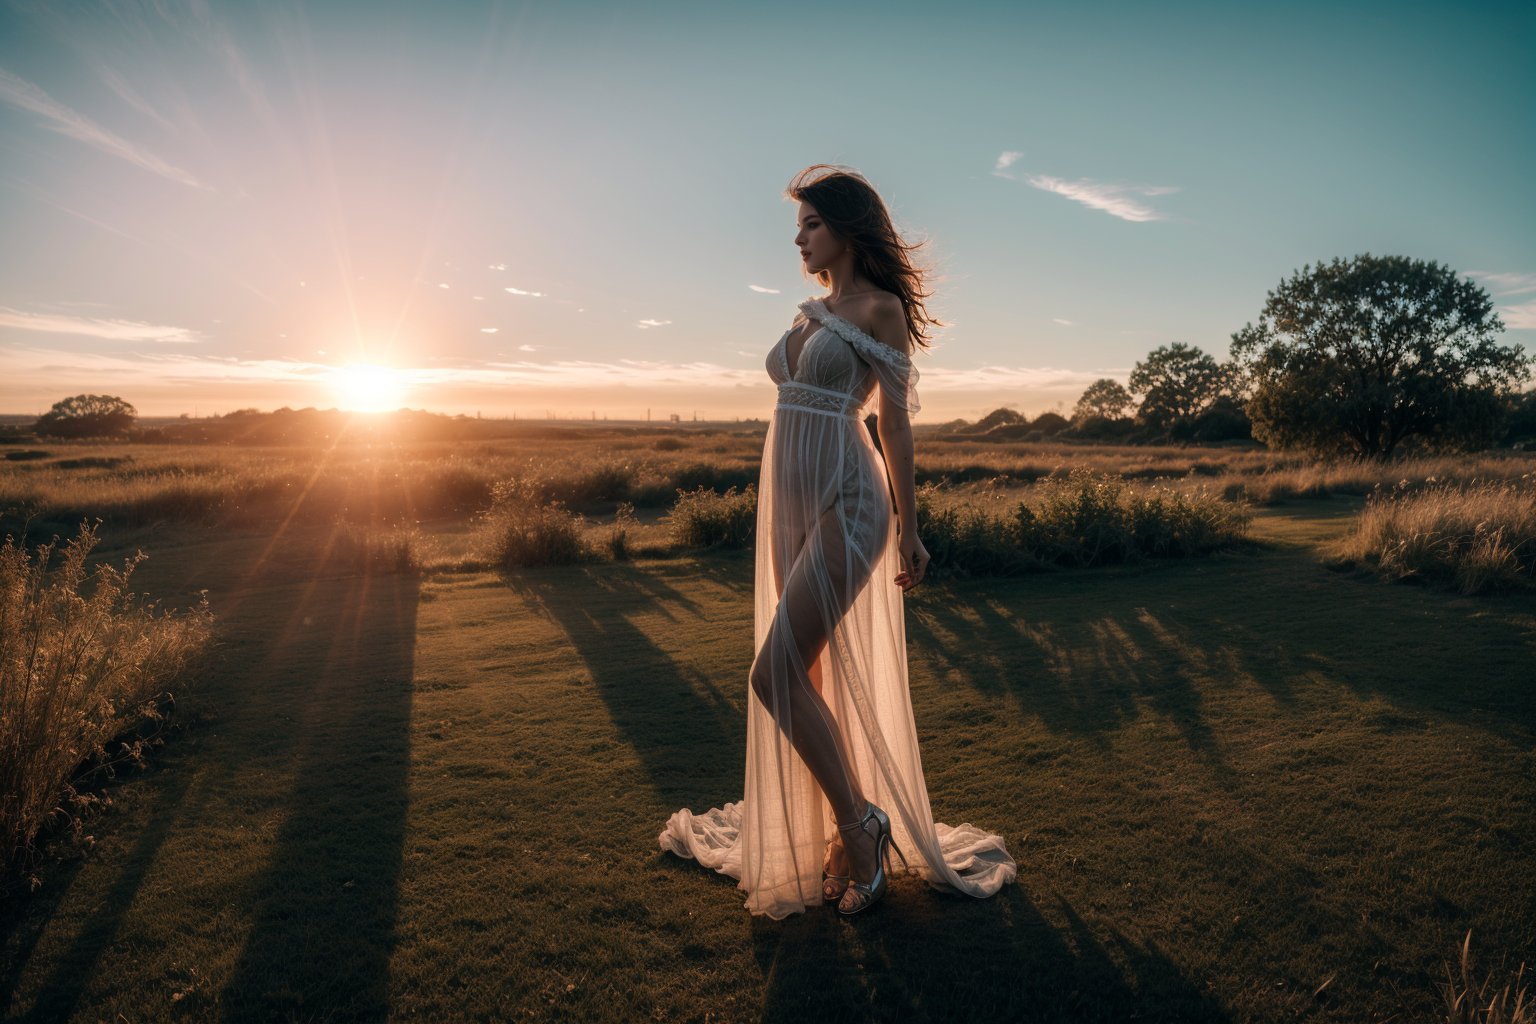 ((Full-Body)), 1female hot model, black hair, wearing ((a white youth dress)), full detail, perfect viewpoint, highly detailed, wide-angle lens, hyper realistic, with dramatic sky, polarizing filter, natural lighting, vivid colors, sunset,Perfect Sun Lighting